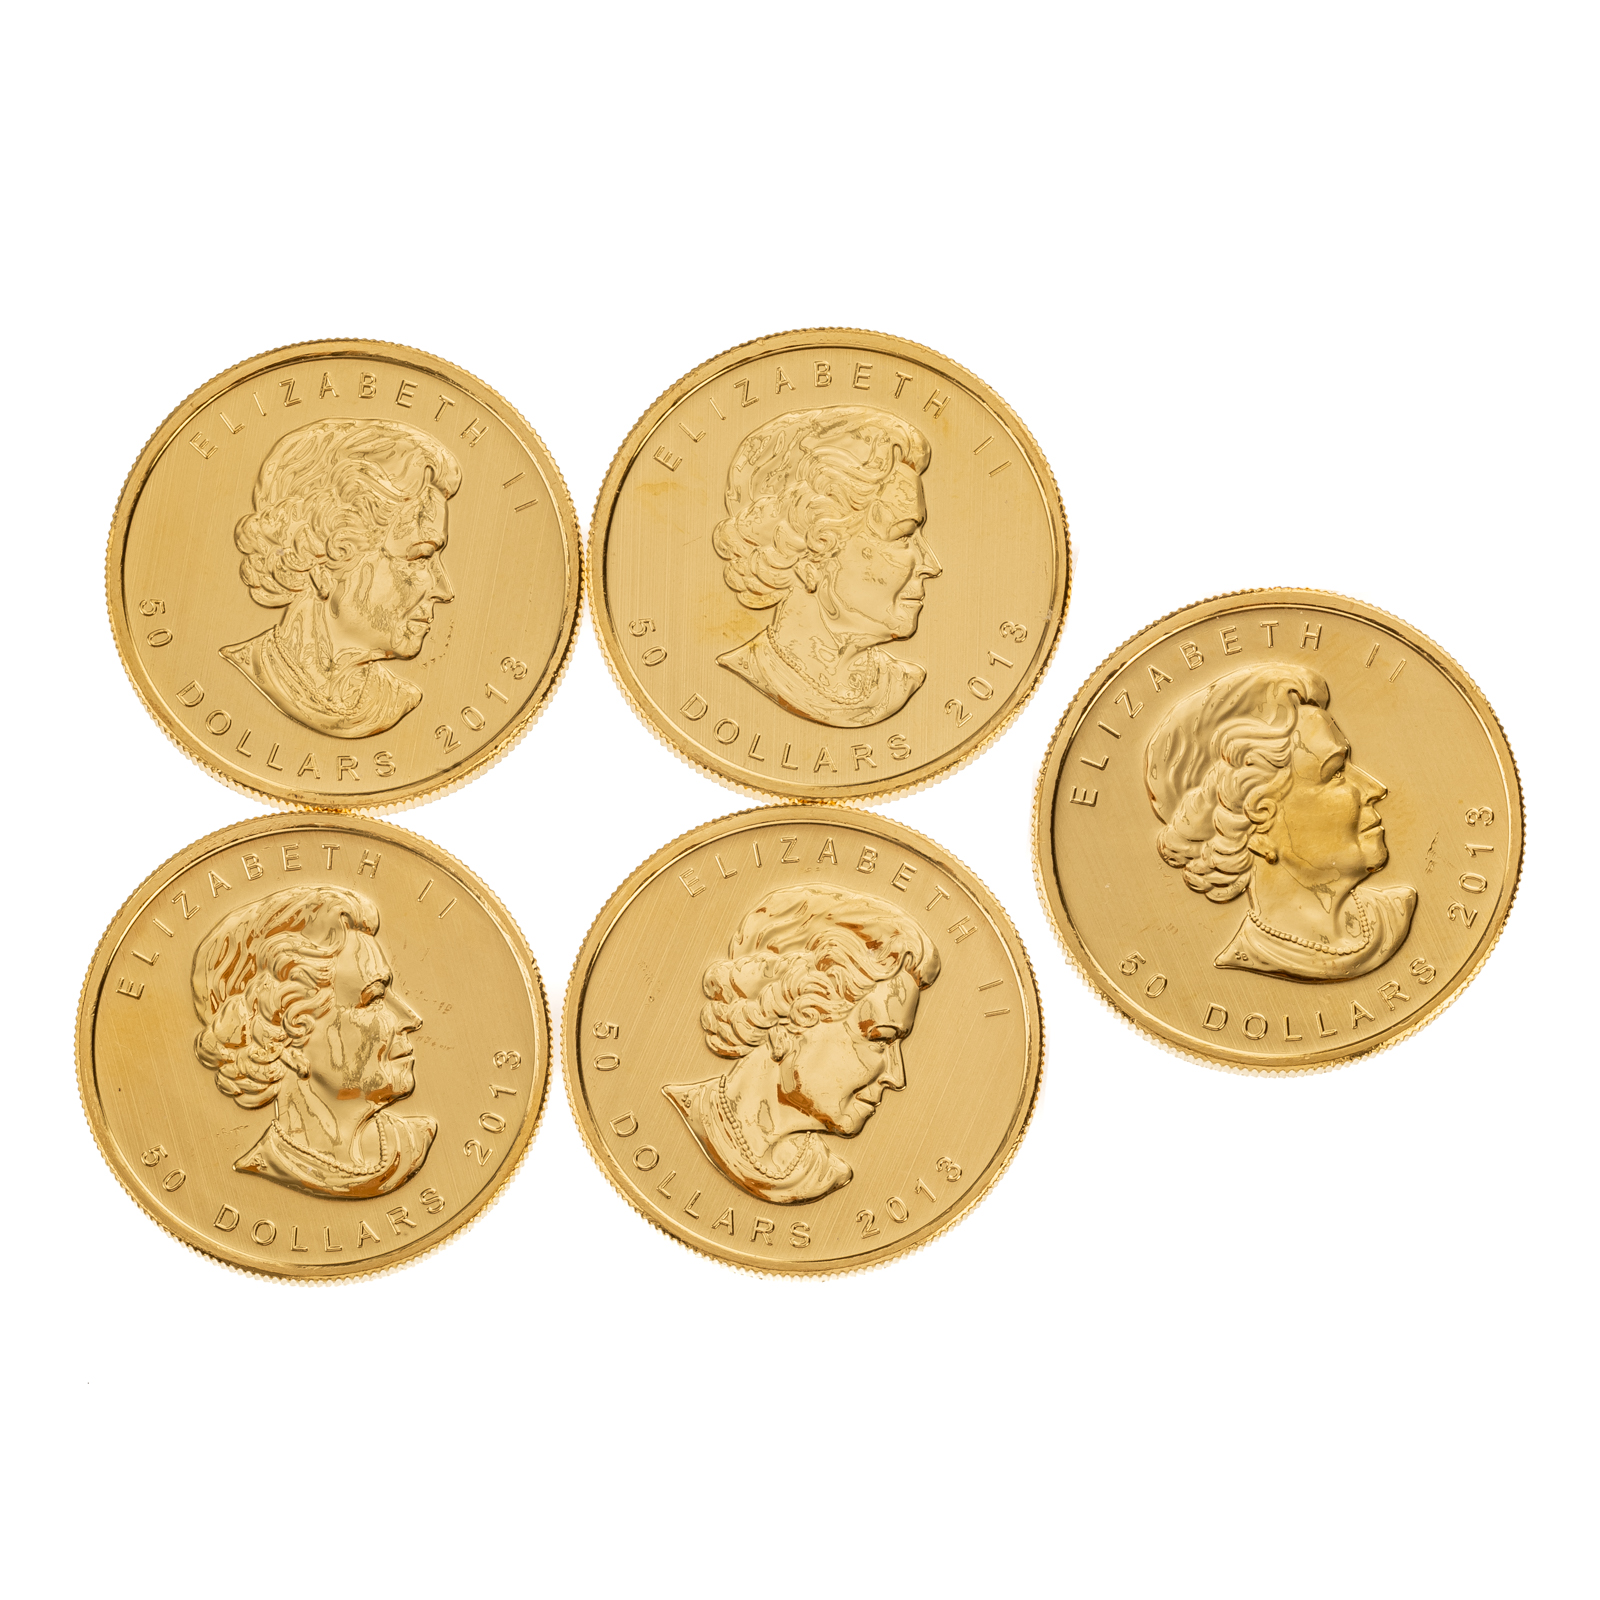 FIVE 2013 1 OZ CANADIAN GOLD MAPLE